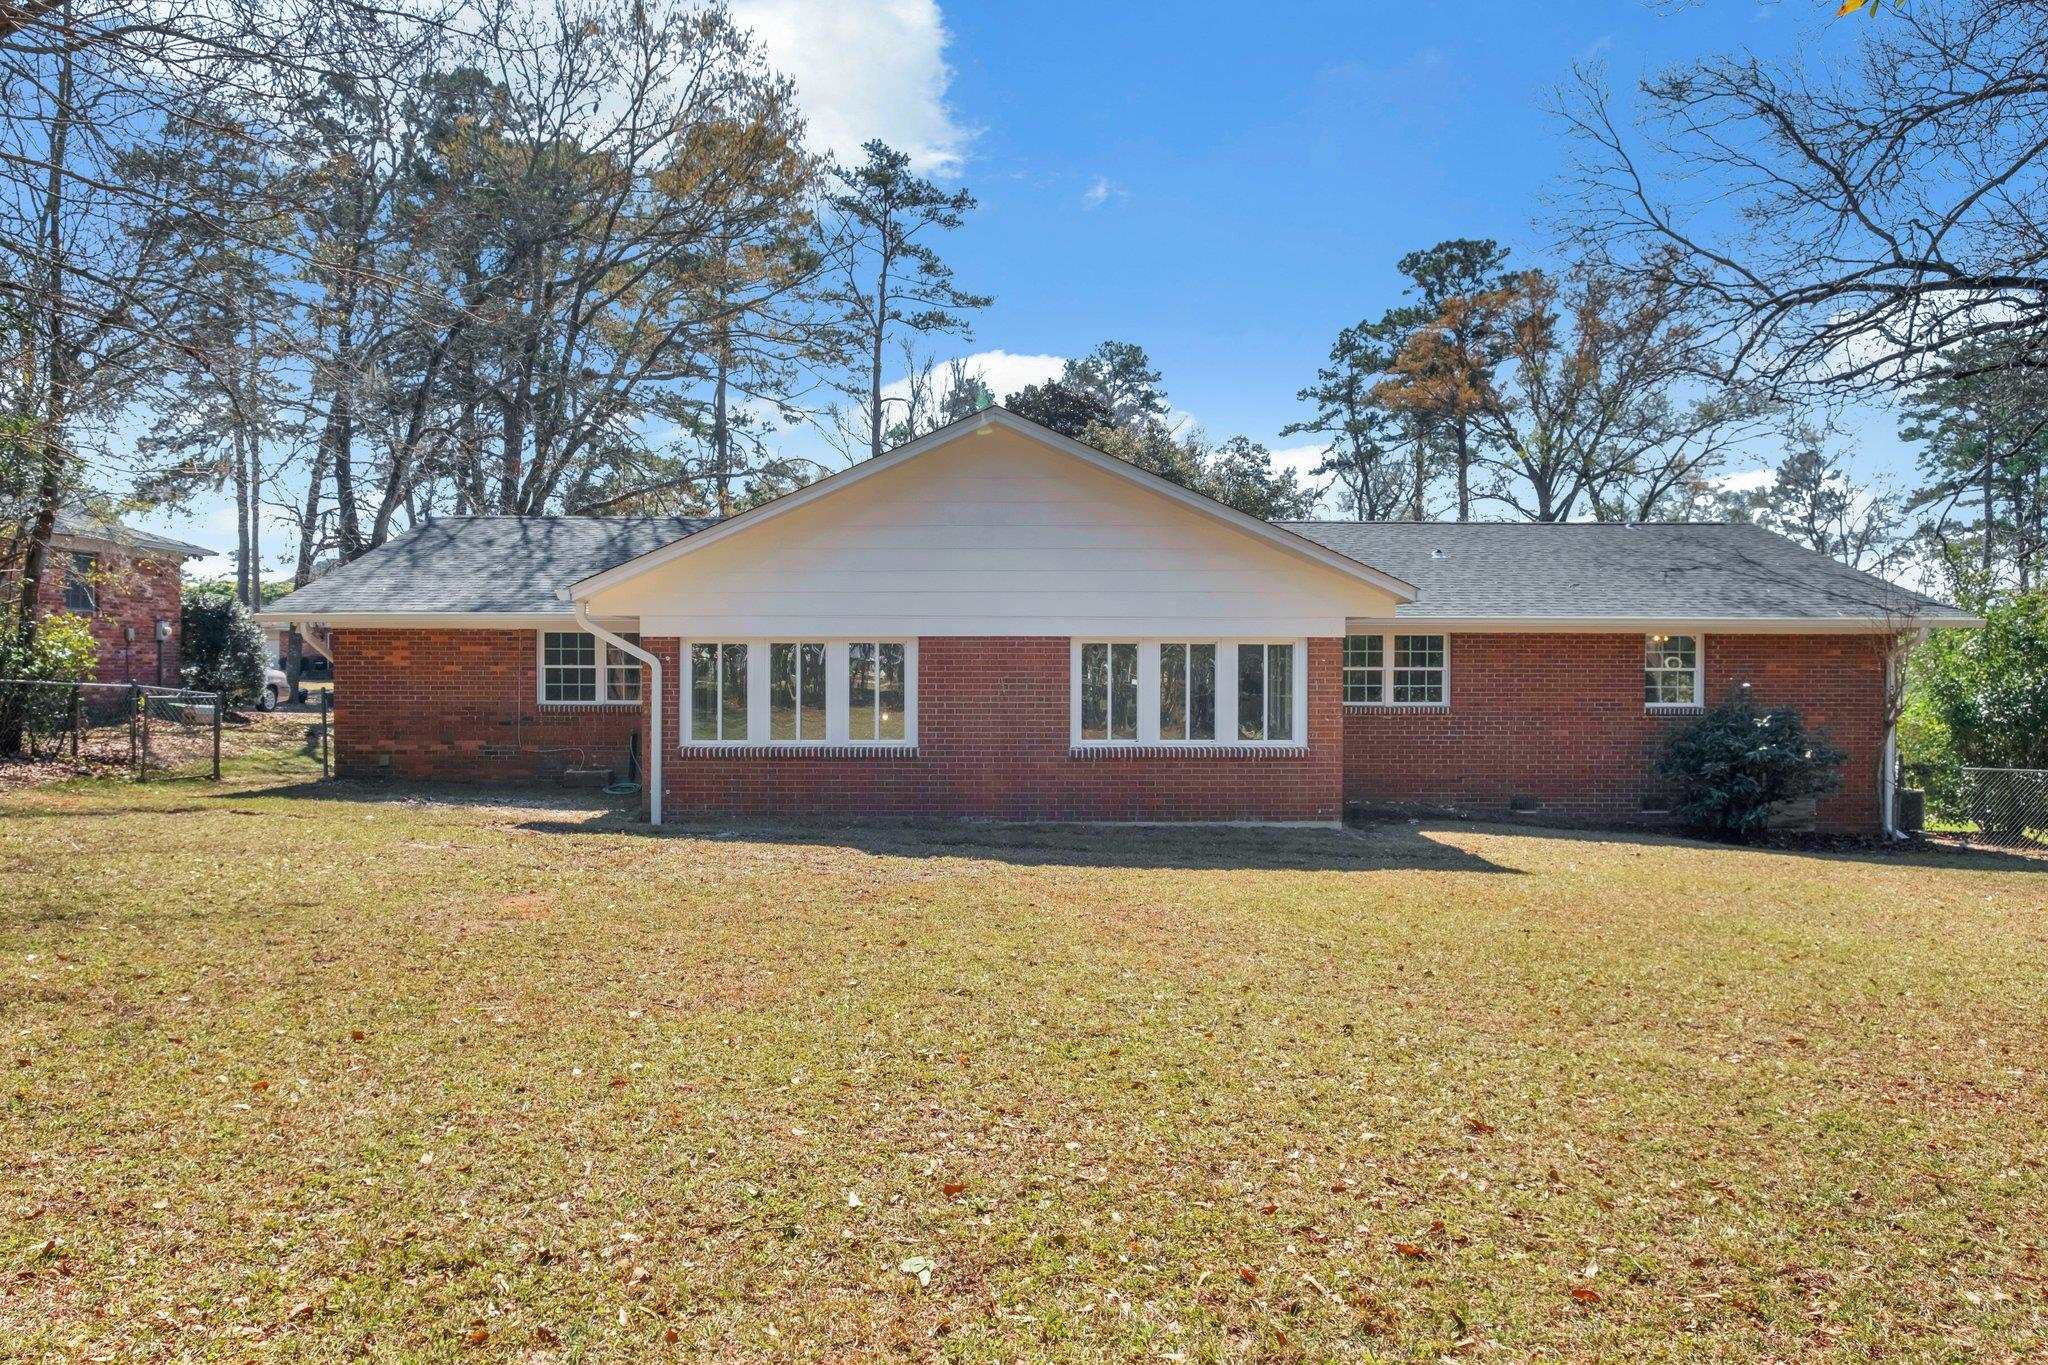 3020 Tipperary Drive,TALLAHASSEE,Florida 32309,4 Bedrooms Bedrooms,2 BathroomsBathrooms,Detached single family,3020 Tipperary Drive,368991